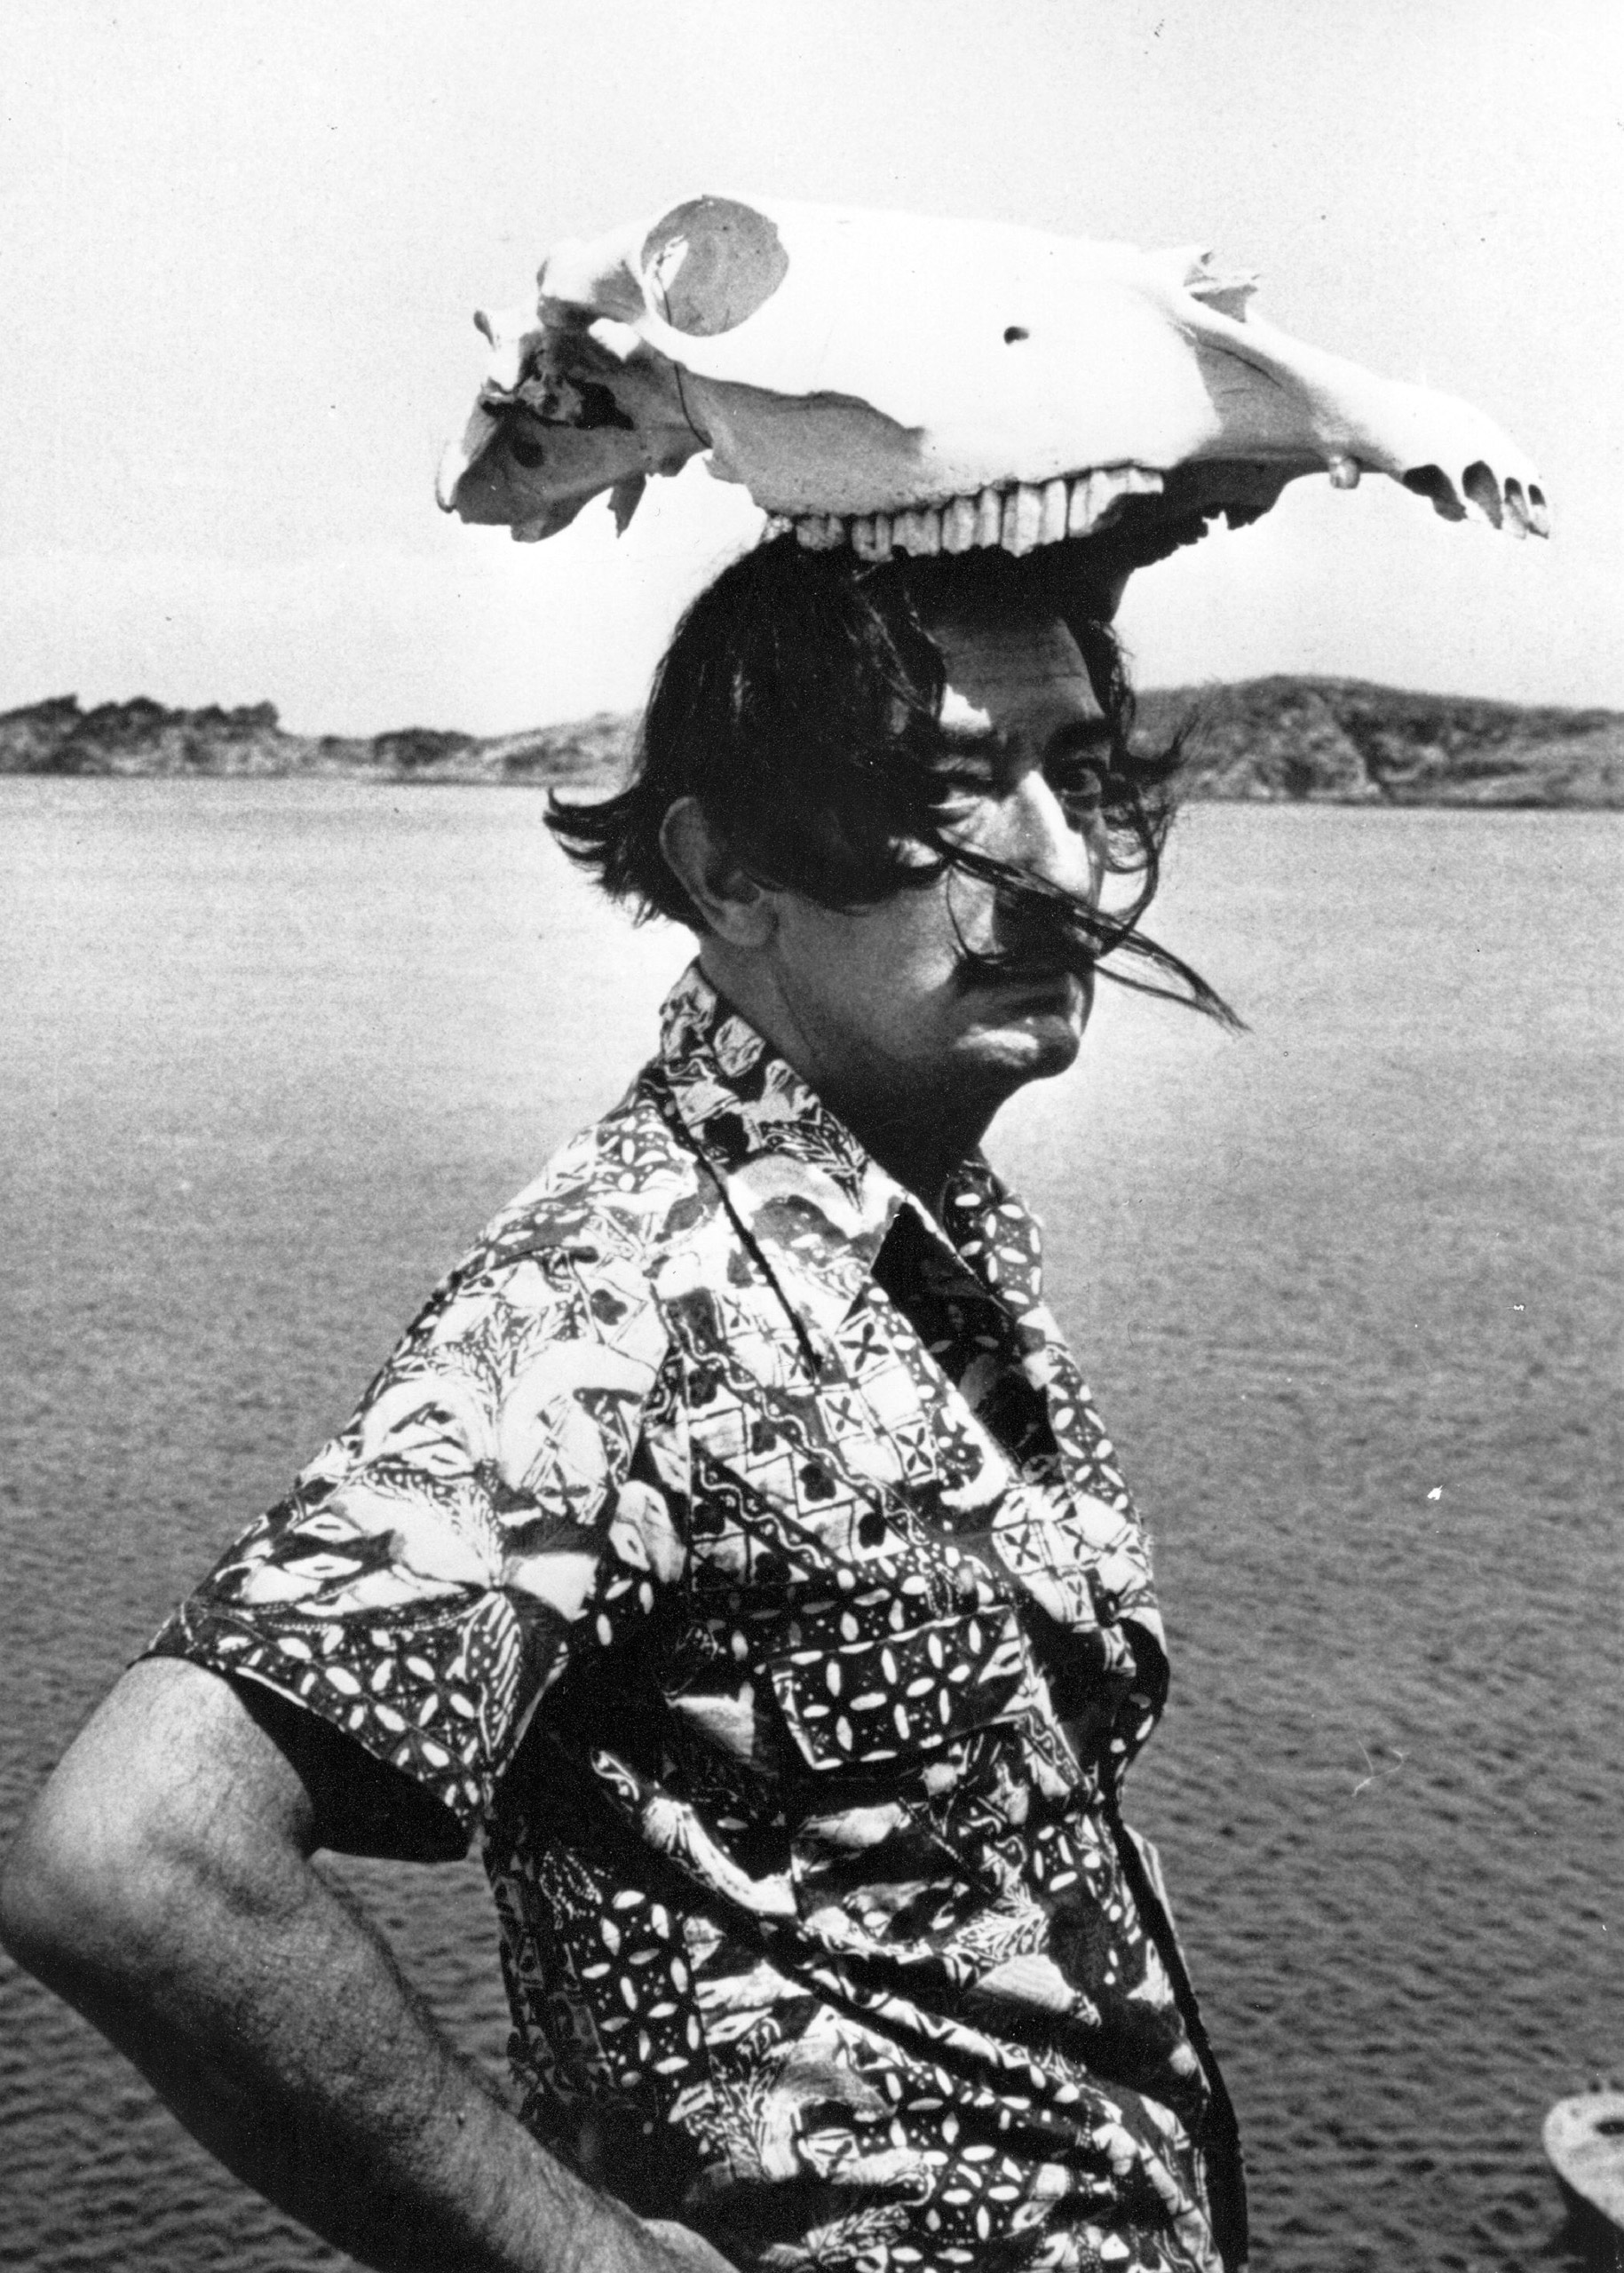 Salvador Dali wearing an animal skull as a hat. 1950.